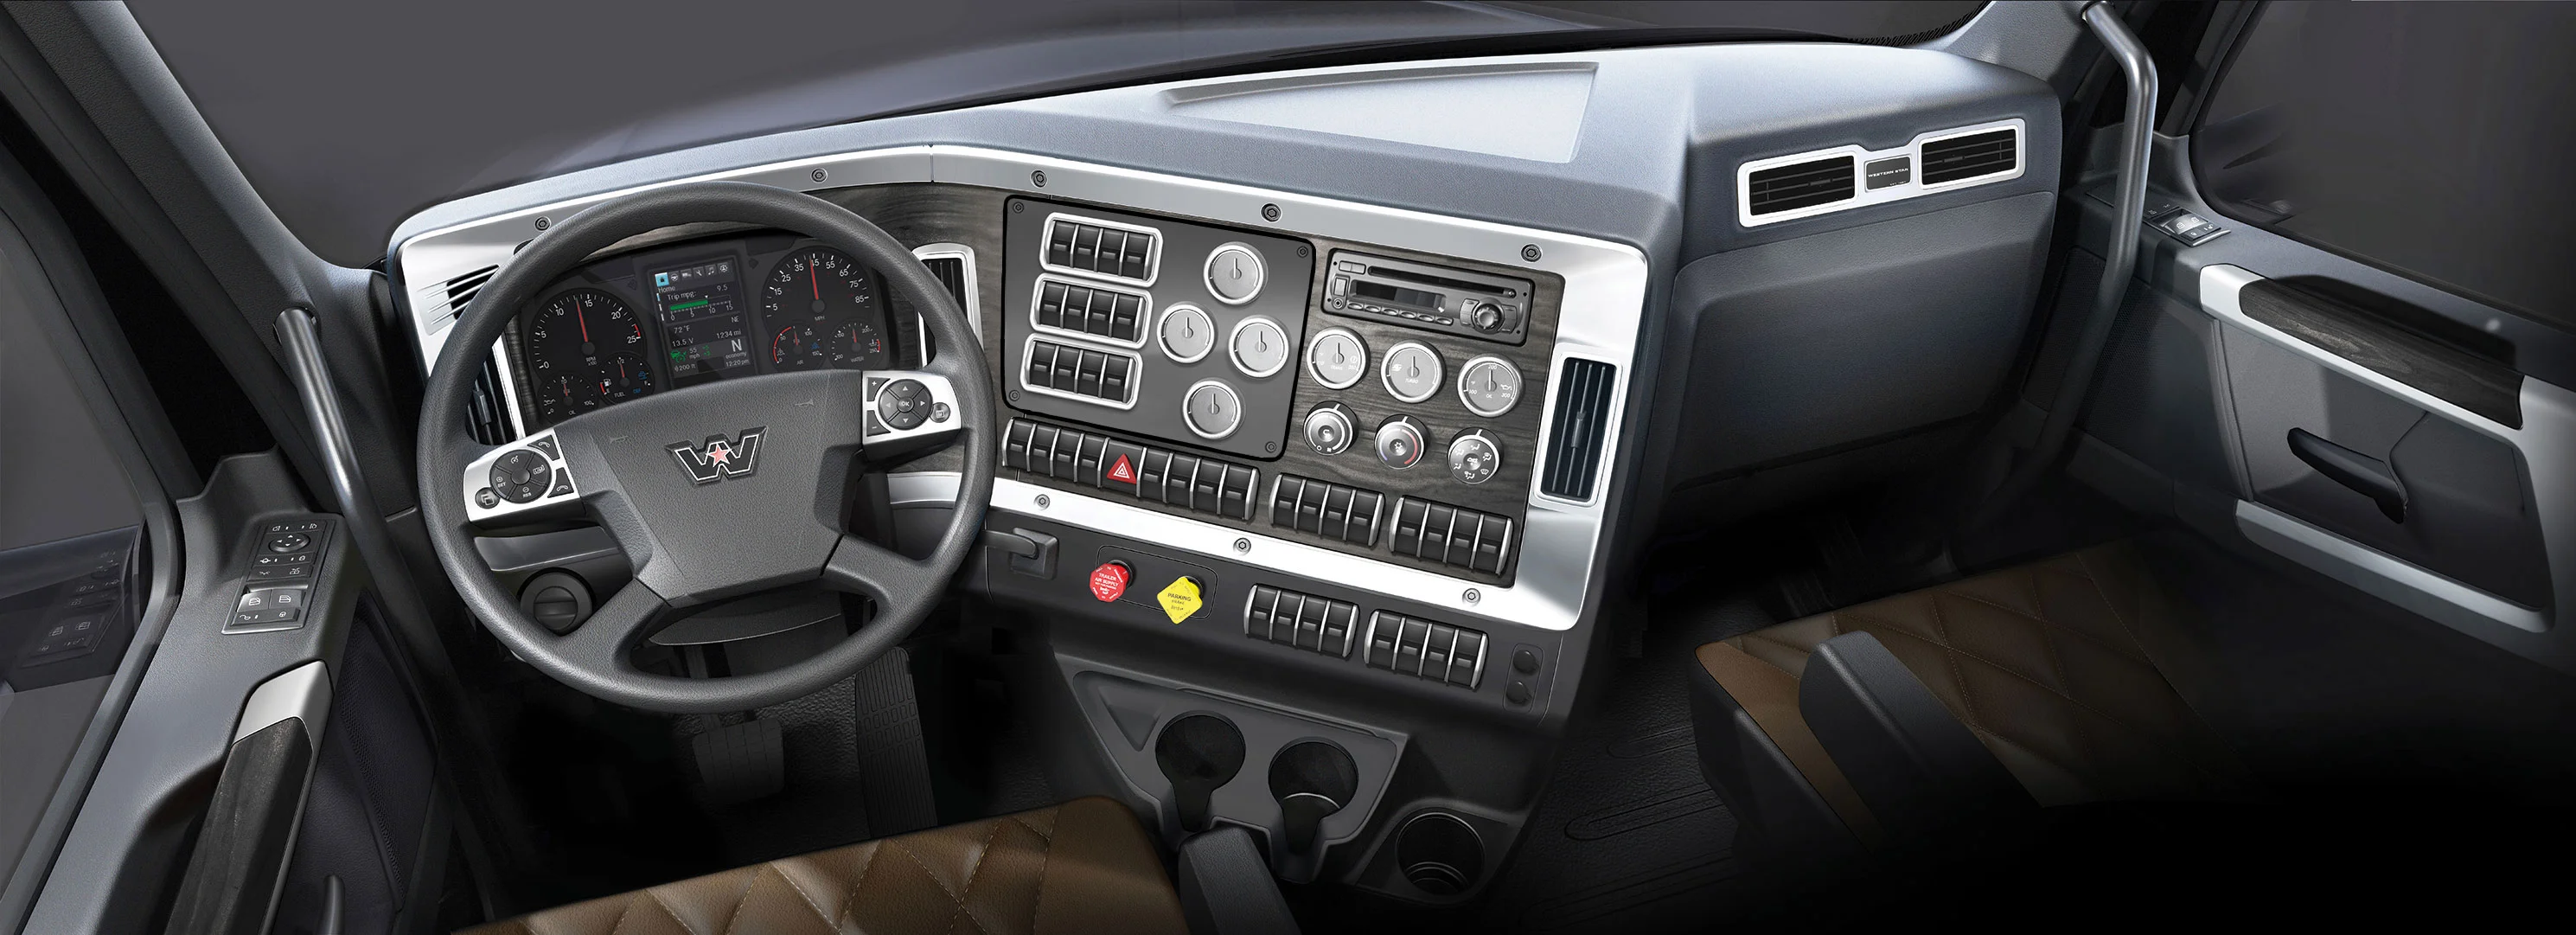 Western Star X Series Interior Dashboard View with Timber Brown Premium Finish